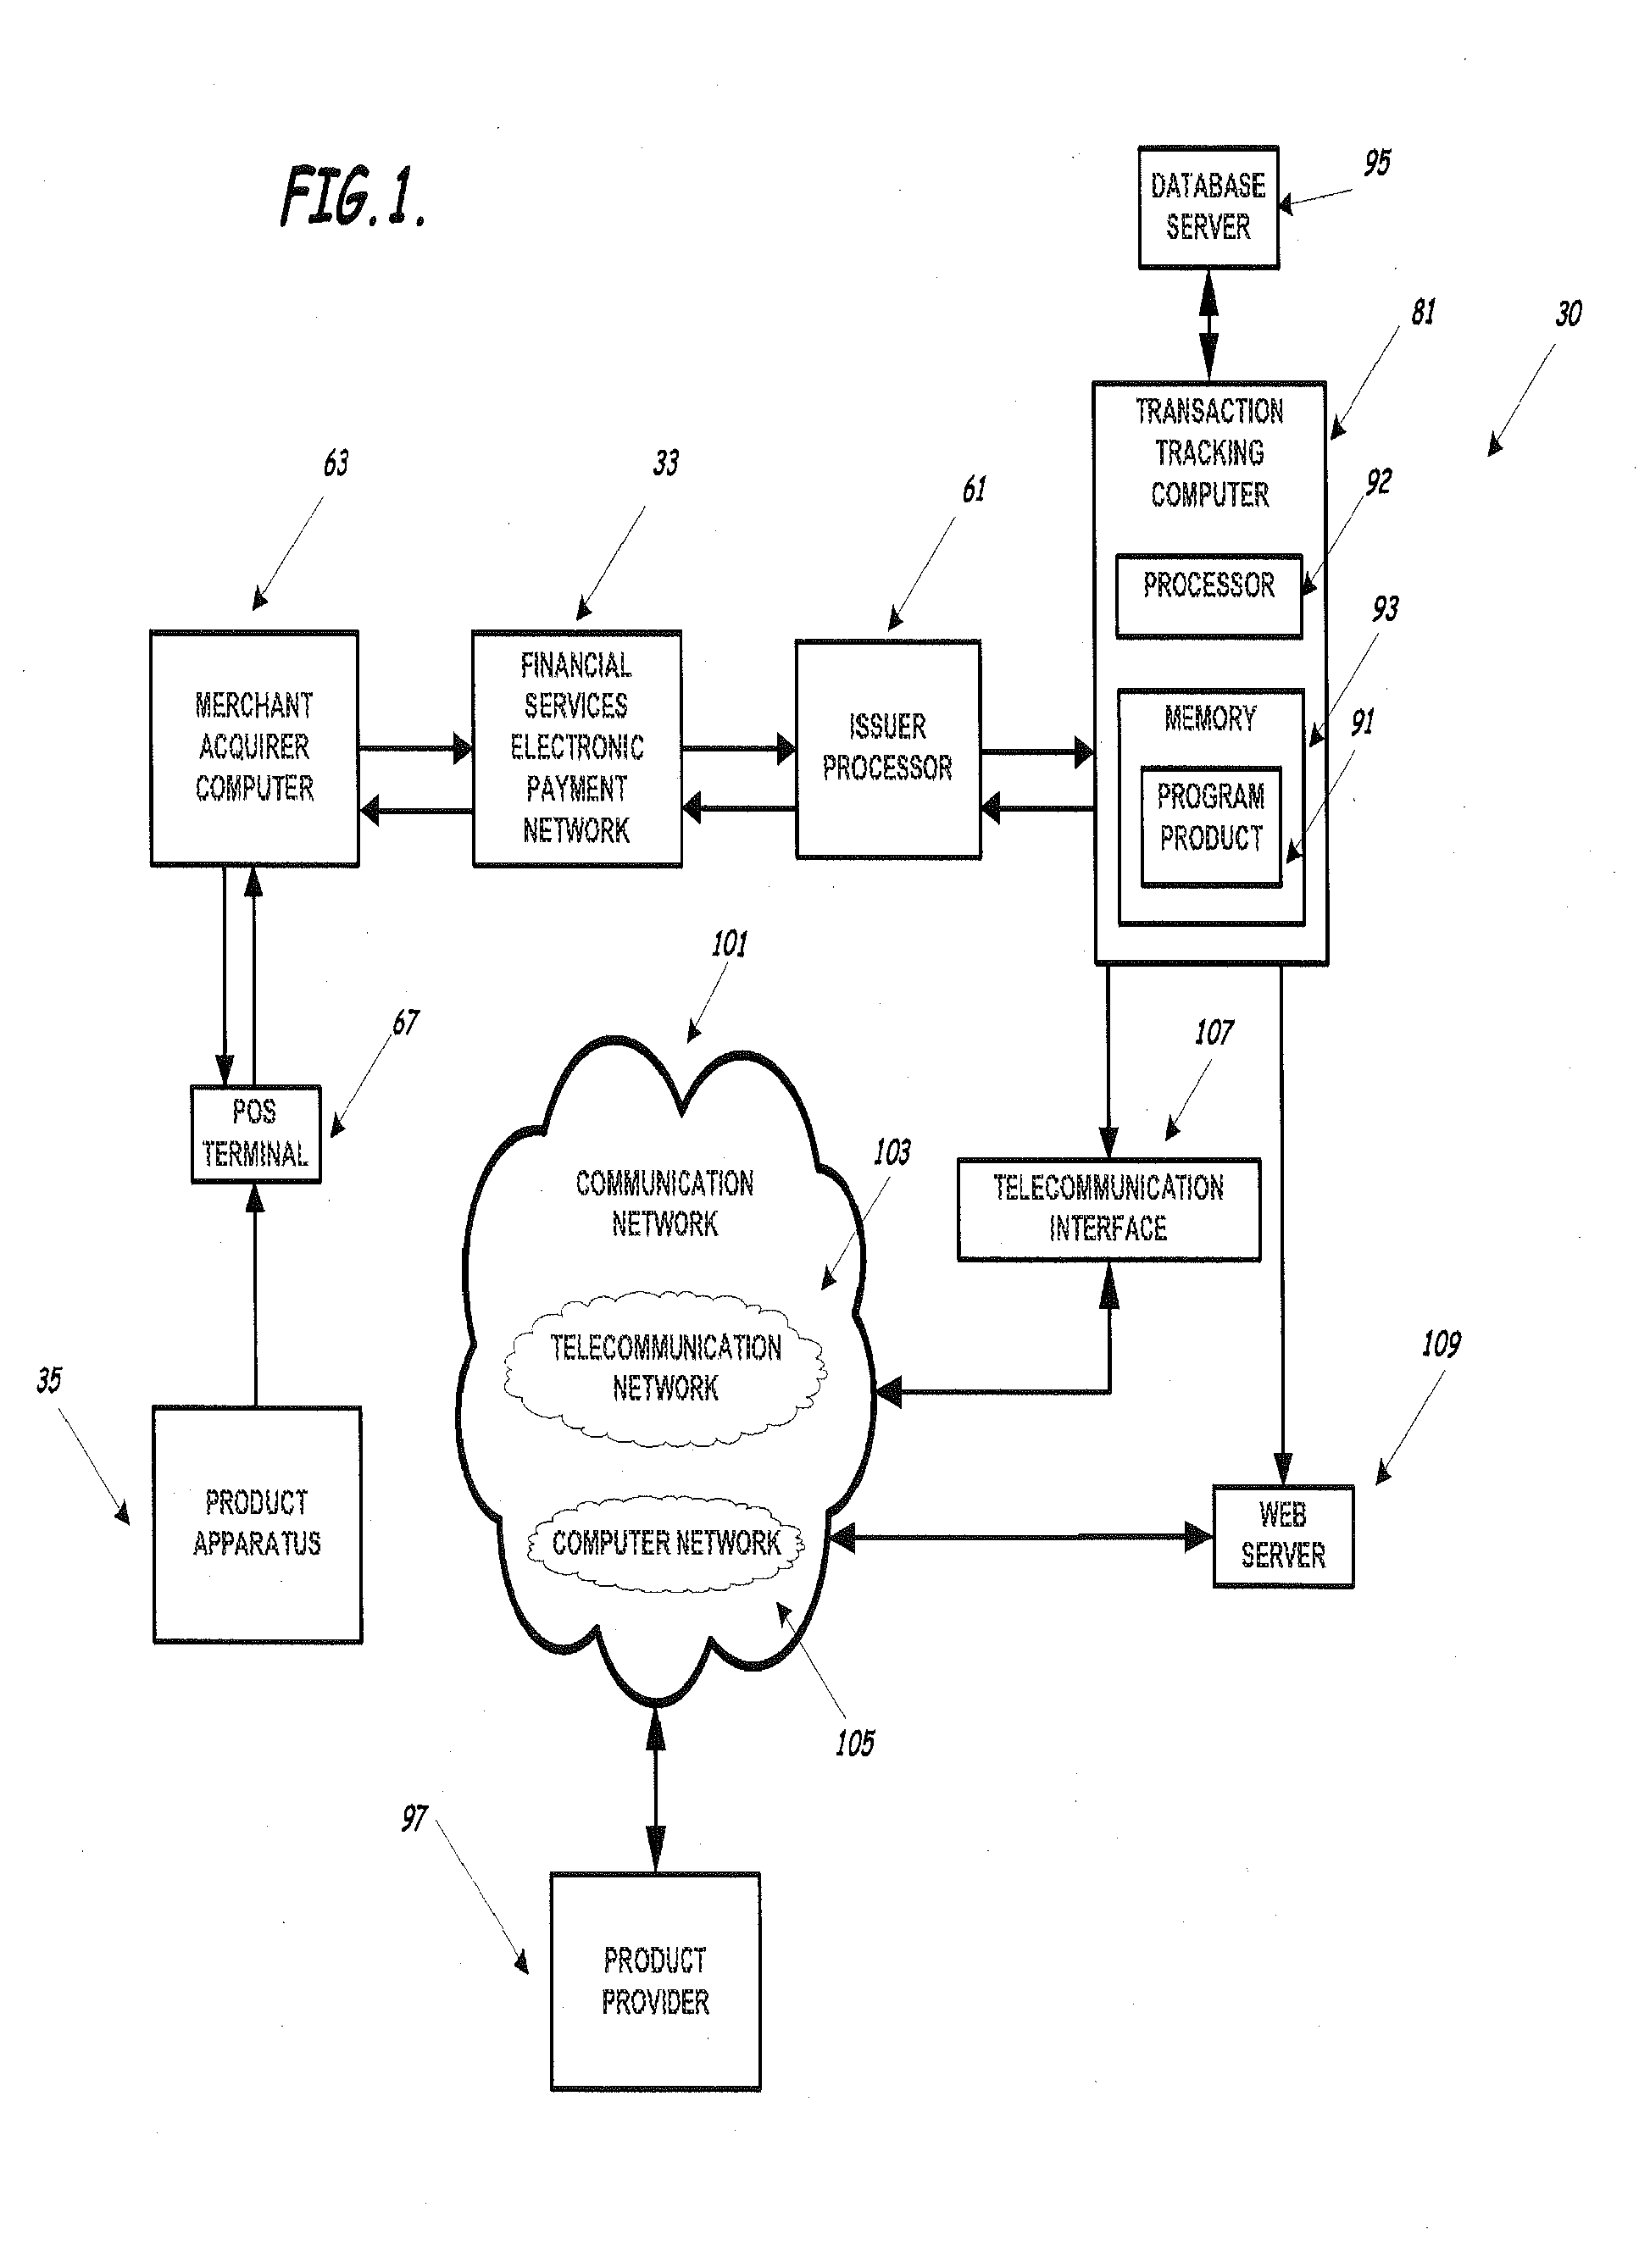 Machine, methods, and program product for electronic inventory tracking